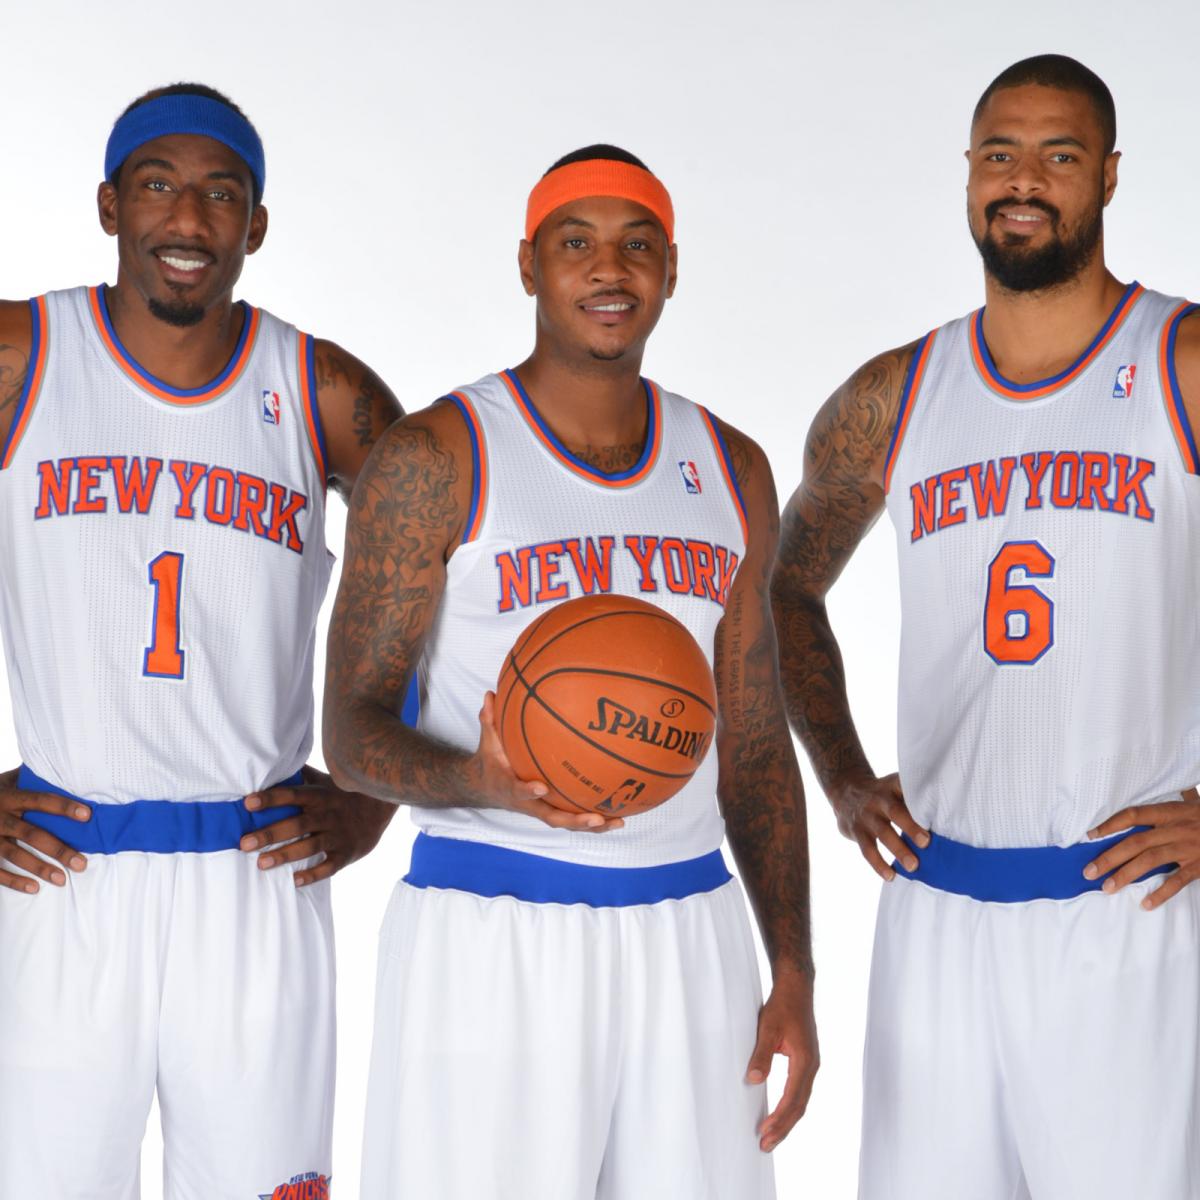 New York Knicks roster 2013: More tools in the toolbox 